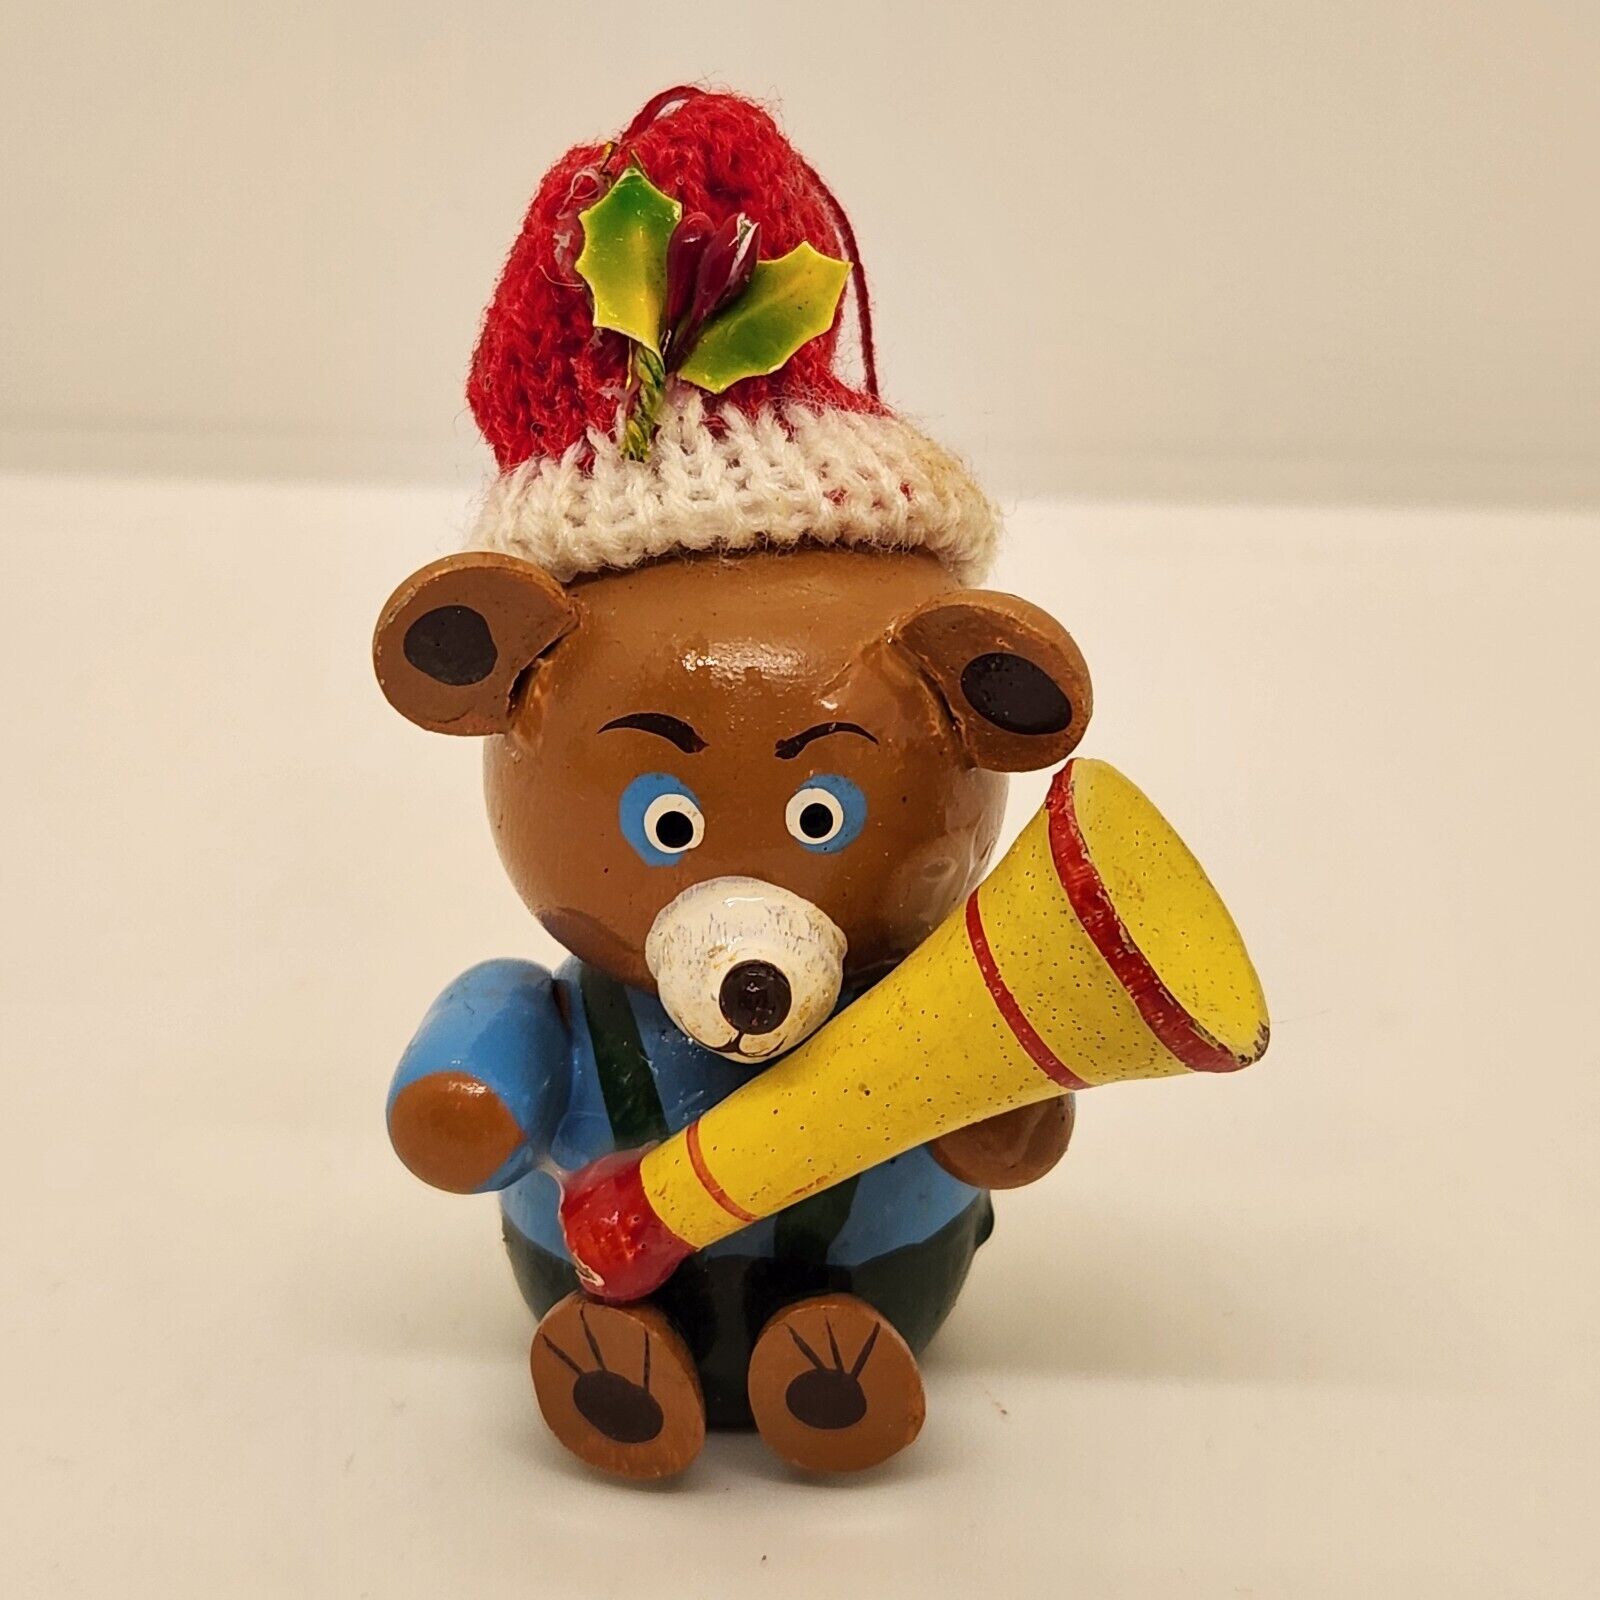 Vintage Christmas Wooden Teddy Bear Toy Ornament With Musical Horn Knitted Hat 